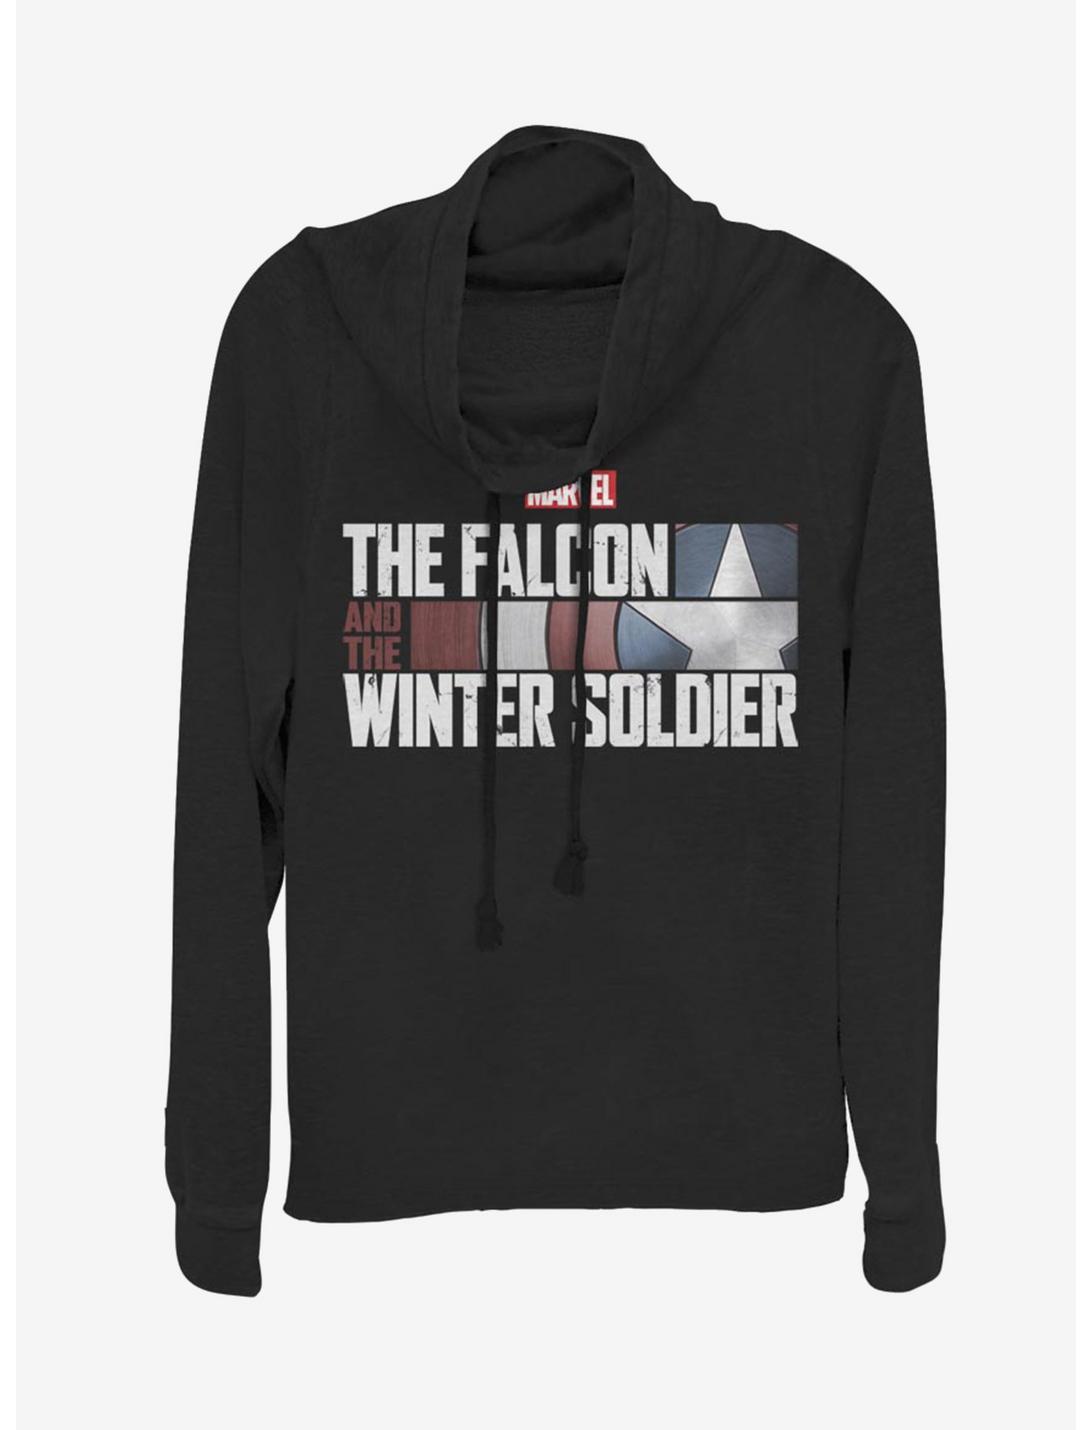 Marvel The Falcon And The Winter Soldier Cowlneck Long-Sleeve Womens Top, BLACK, hi-res